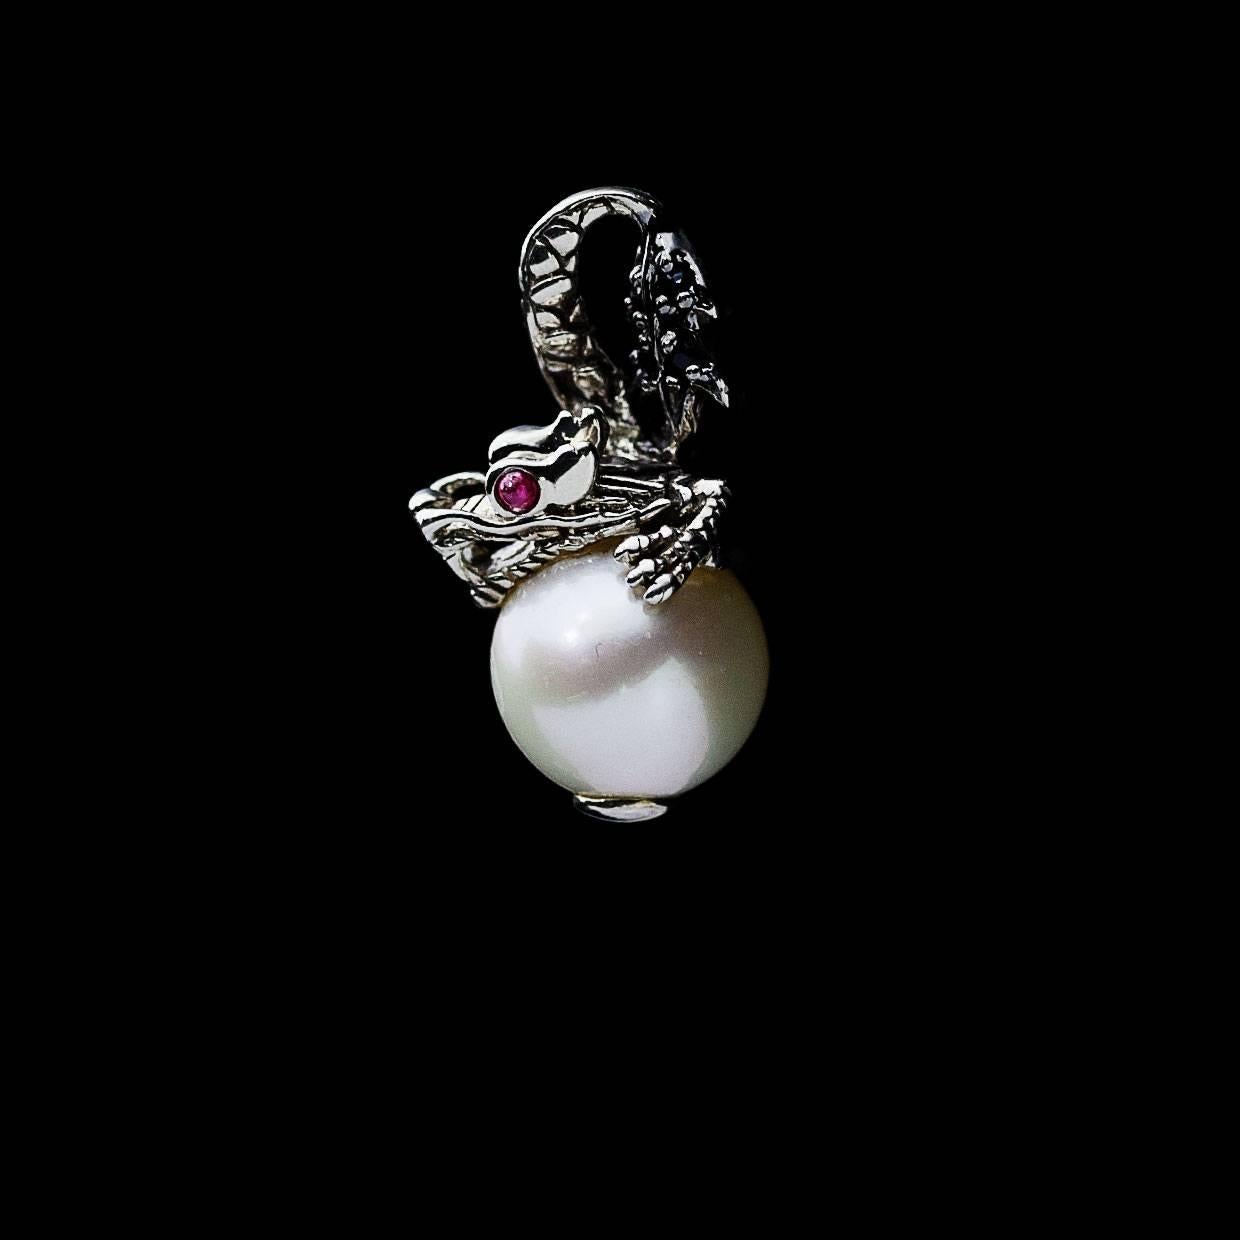 Each piece of John Hardy jewelry has been crafted in Bali since 1975. John Hardy is dedicated to creating timeless one-of-a-kind pieces that are brilliantly alive.

This sterling silver pearl and ruby pendant is from John Hardy's Naga collection.